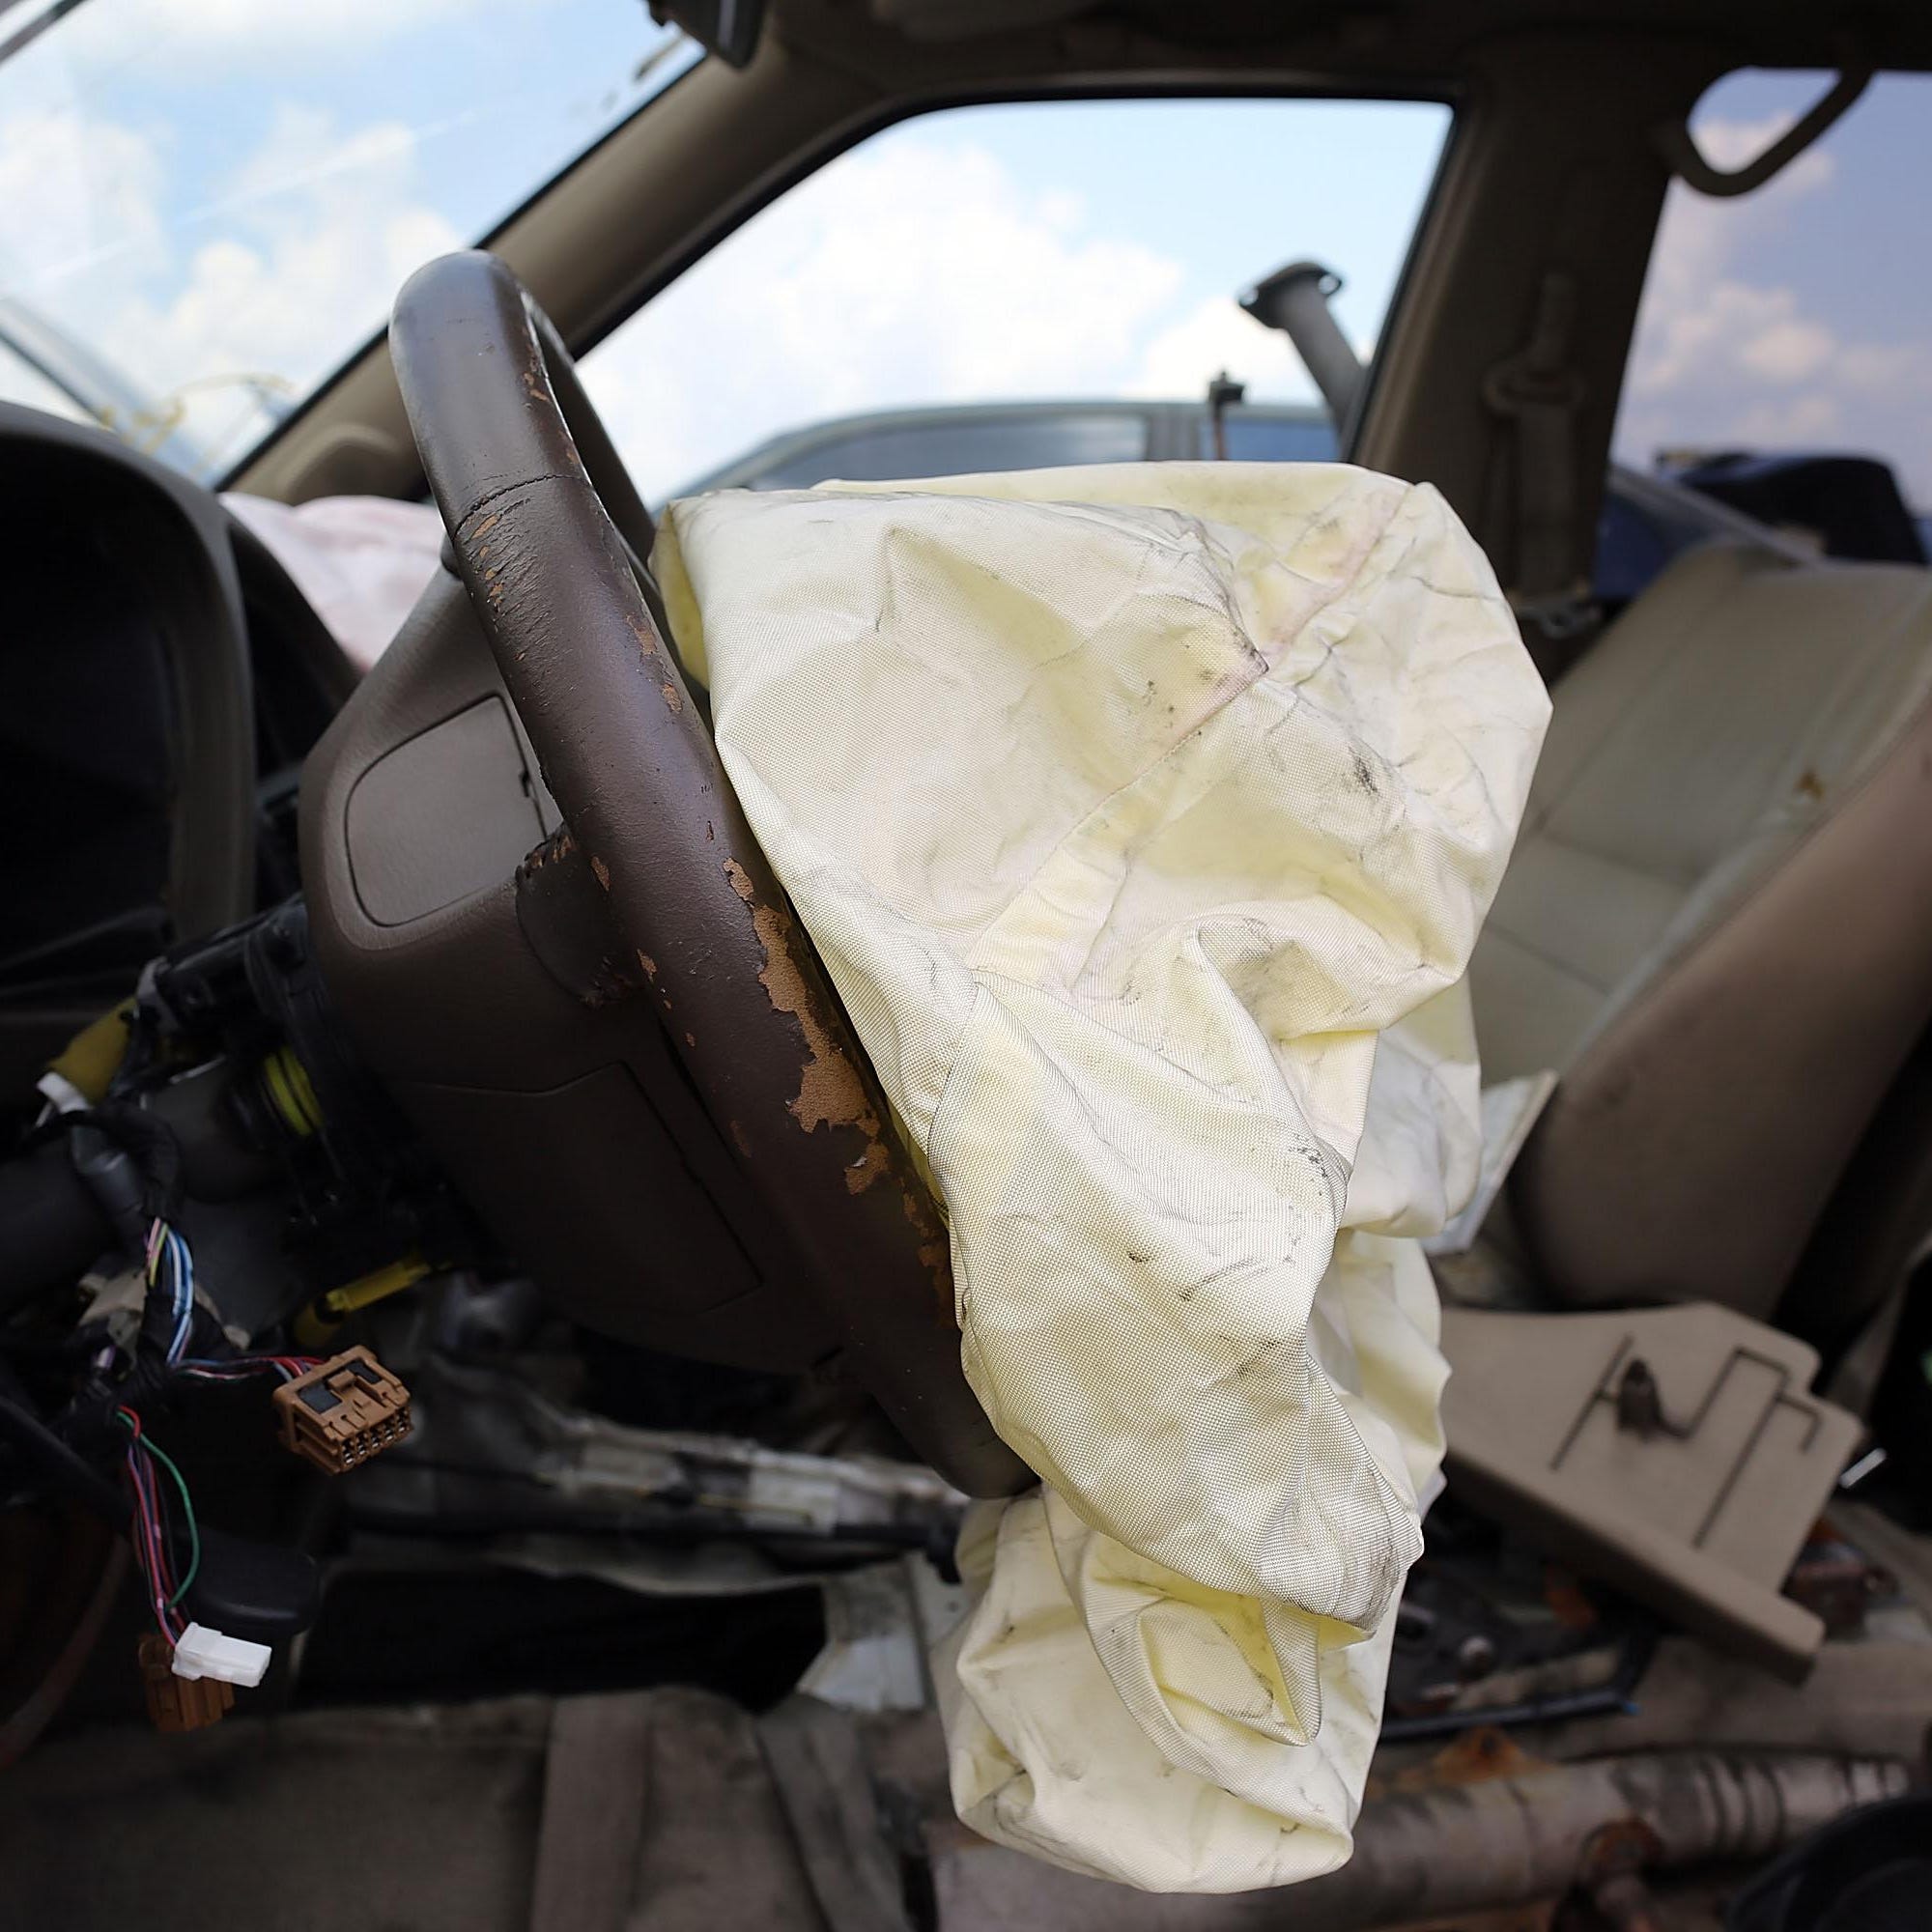 A deployed airbag is seen in a salvage yard in Medley, Florida. The largest automotive recall in history centers around the defective Takata Corp. air bags that are found in millions of vehicles that are manufactured by BMW, Chrysler, Daimler Trucks, Ford, General Motors, Honda, Mazda, Mitsubishi, Nissan, Subaru and Toyota.